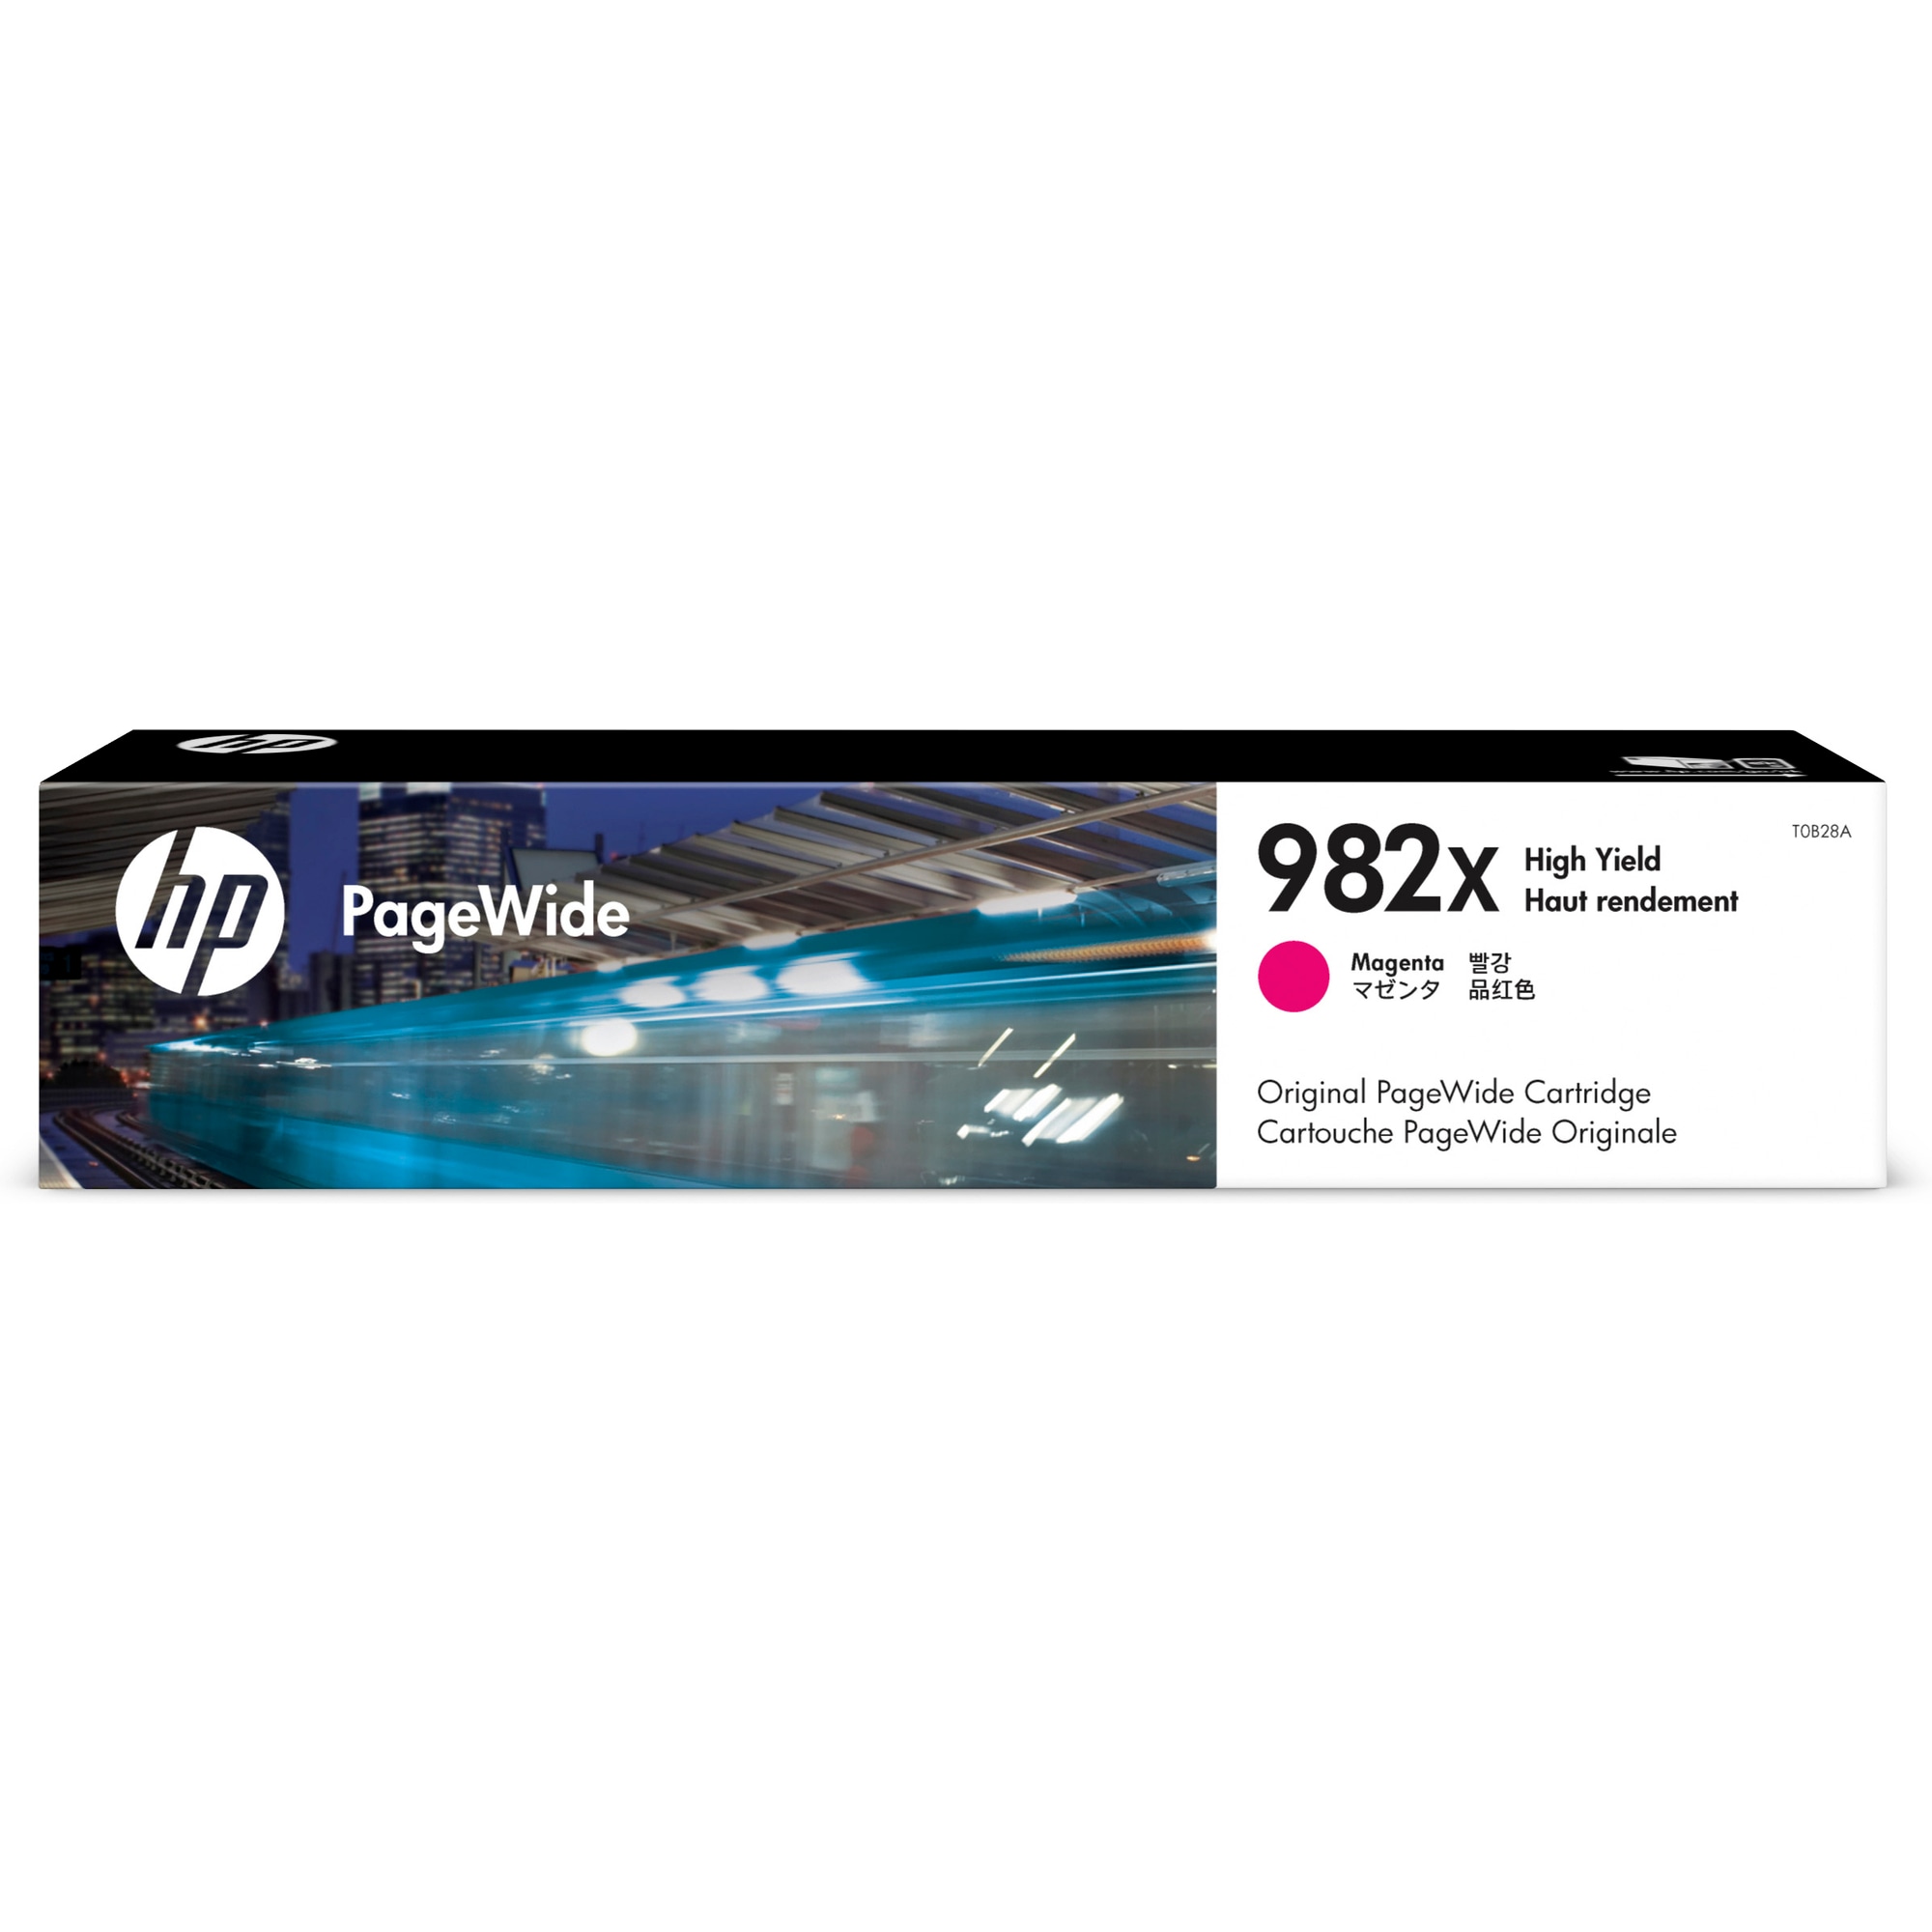 HP 982X High Yield Magenta Original PageWide Cartridge (16, 000 pages)0 